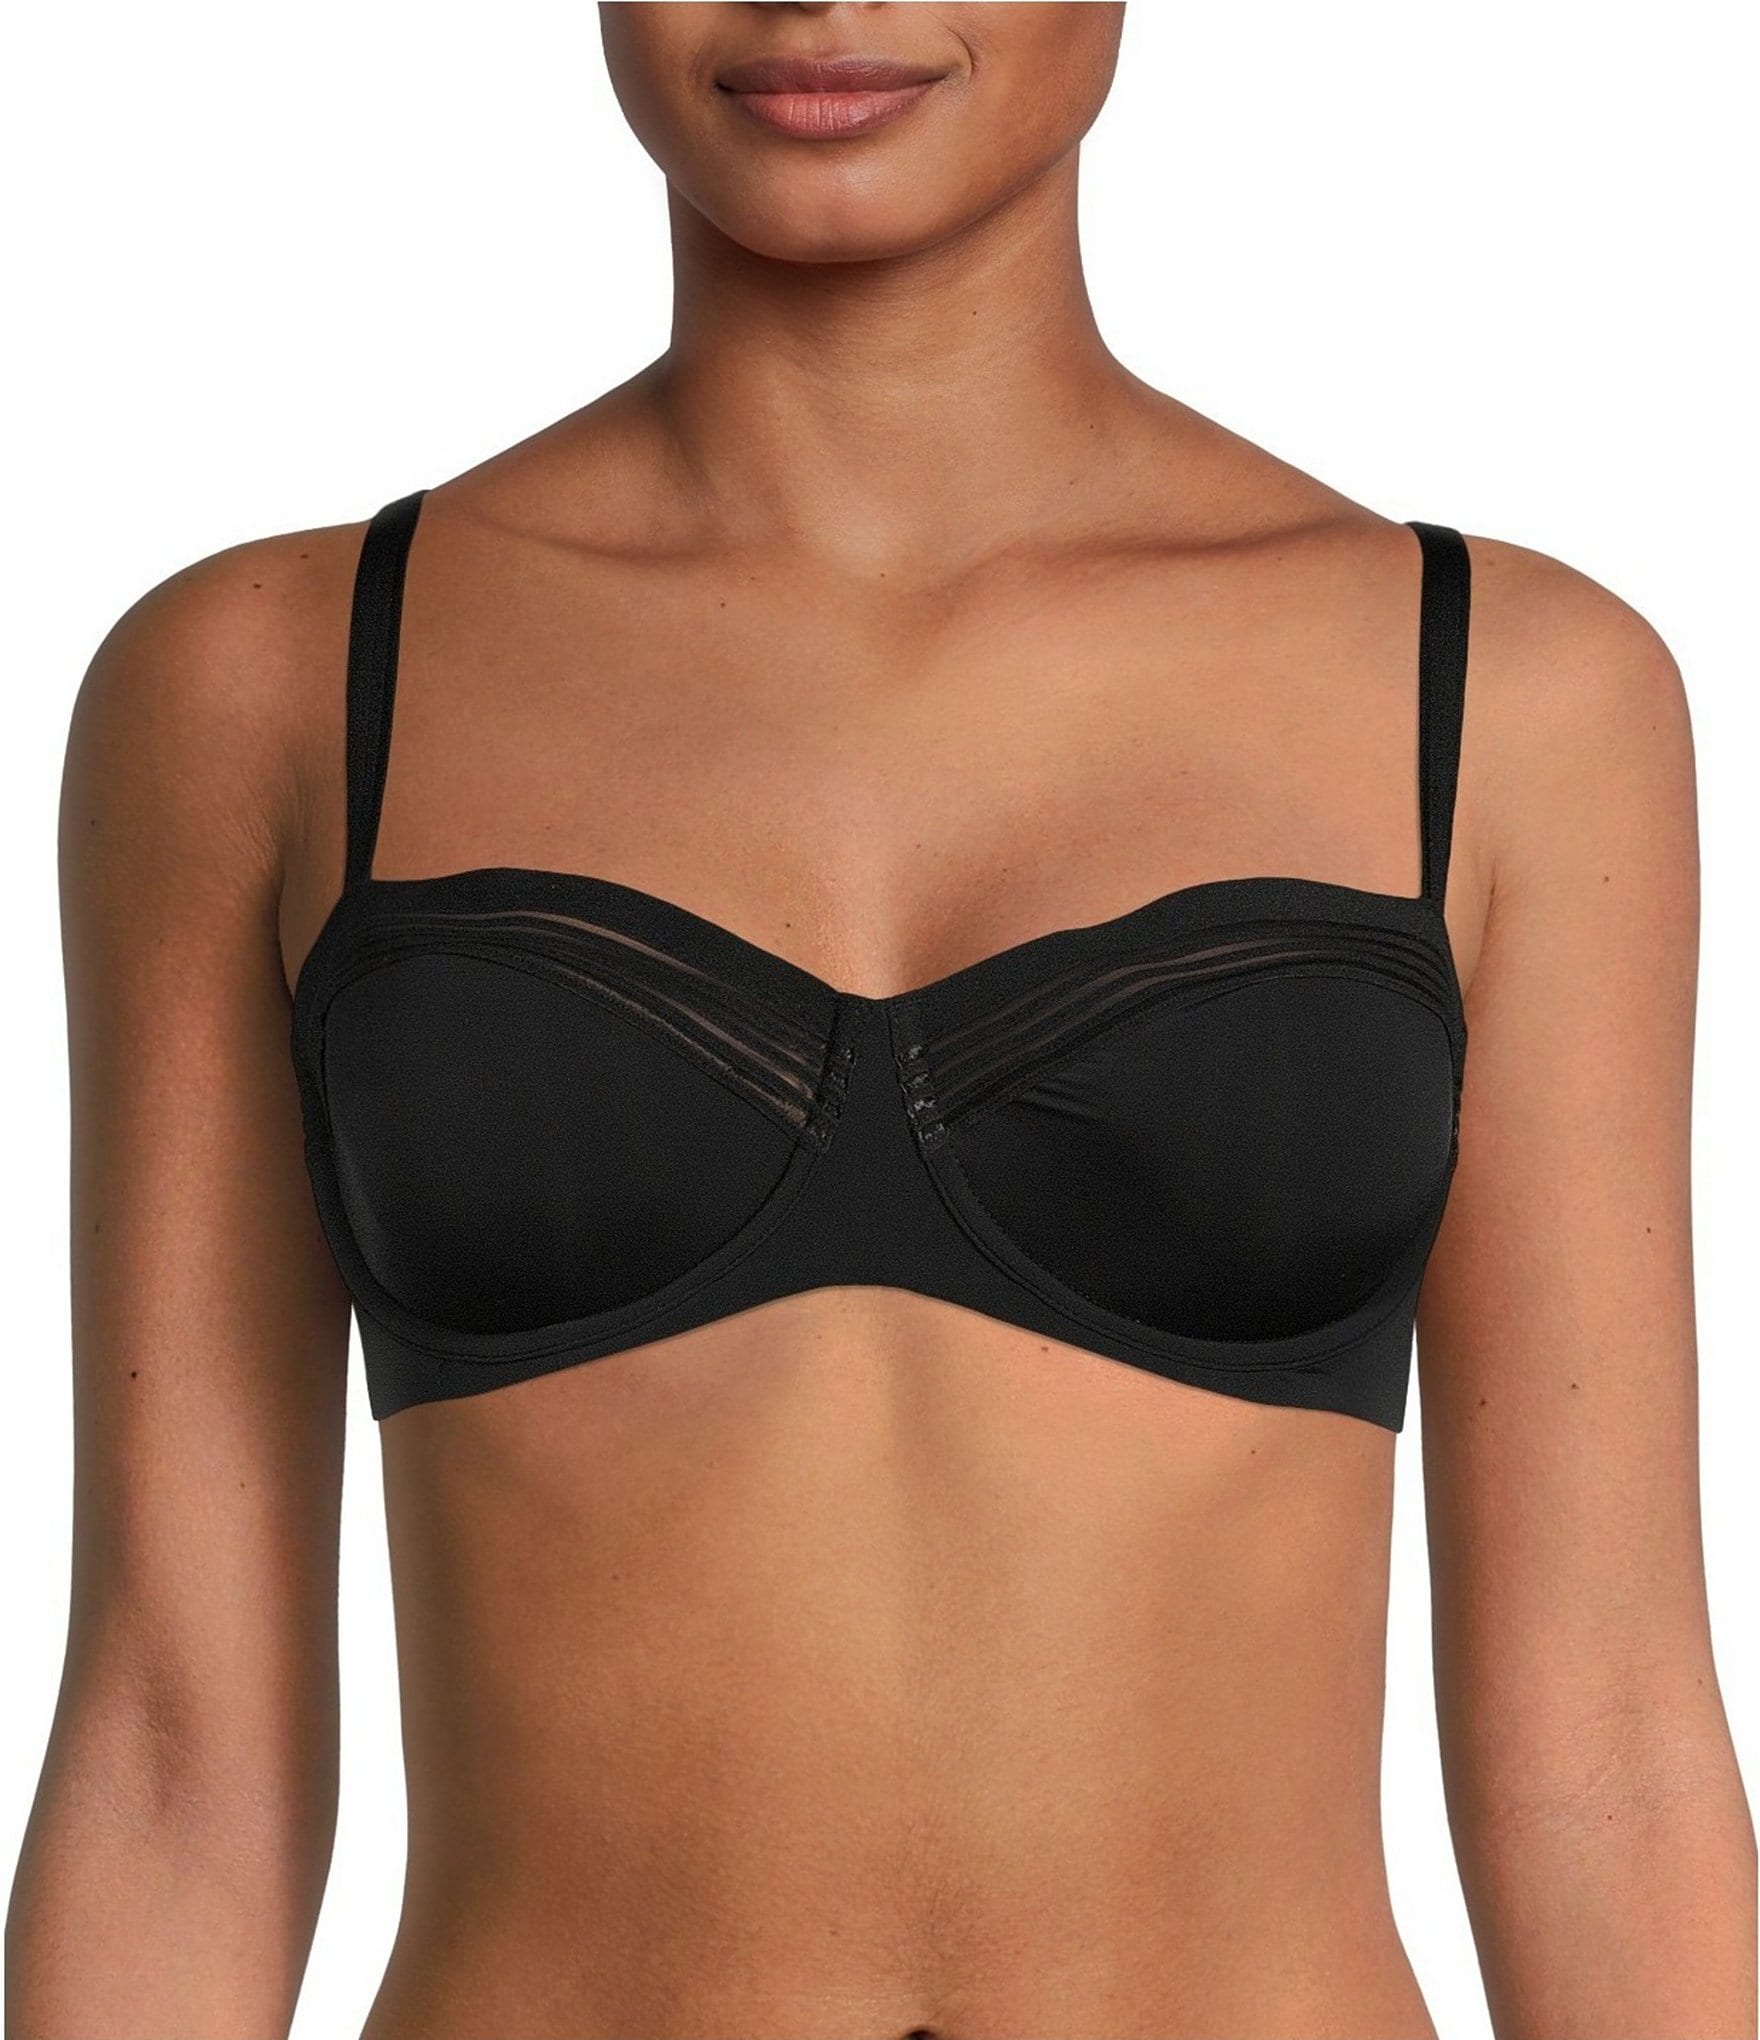 Le Mystere Women's LACE Perfection Unlined Strapless Bra, Black